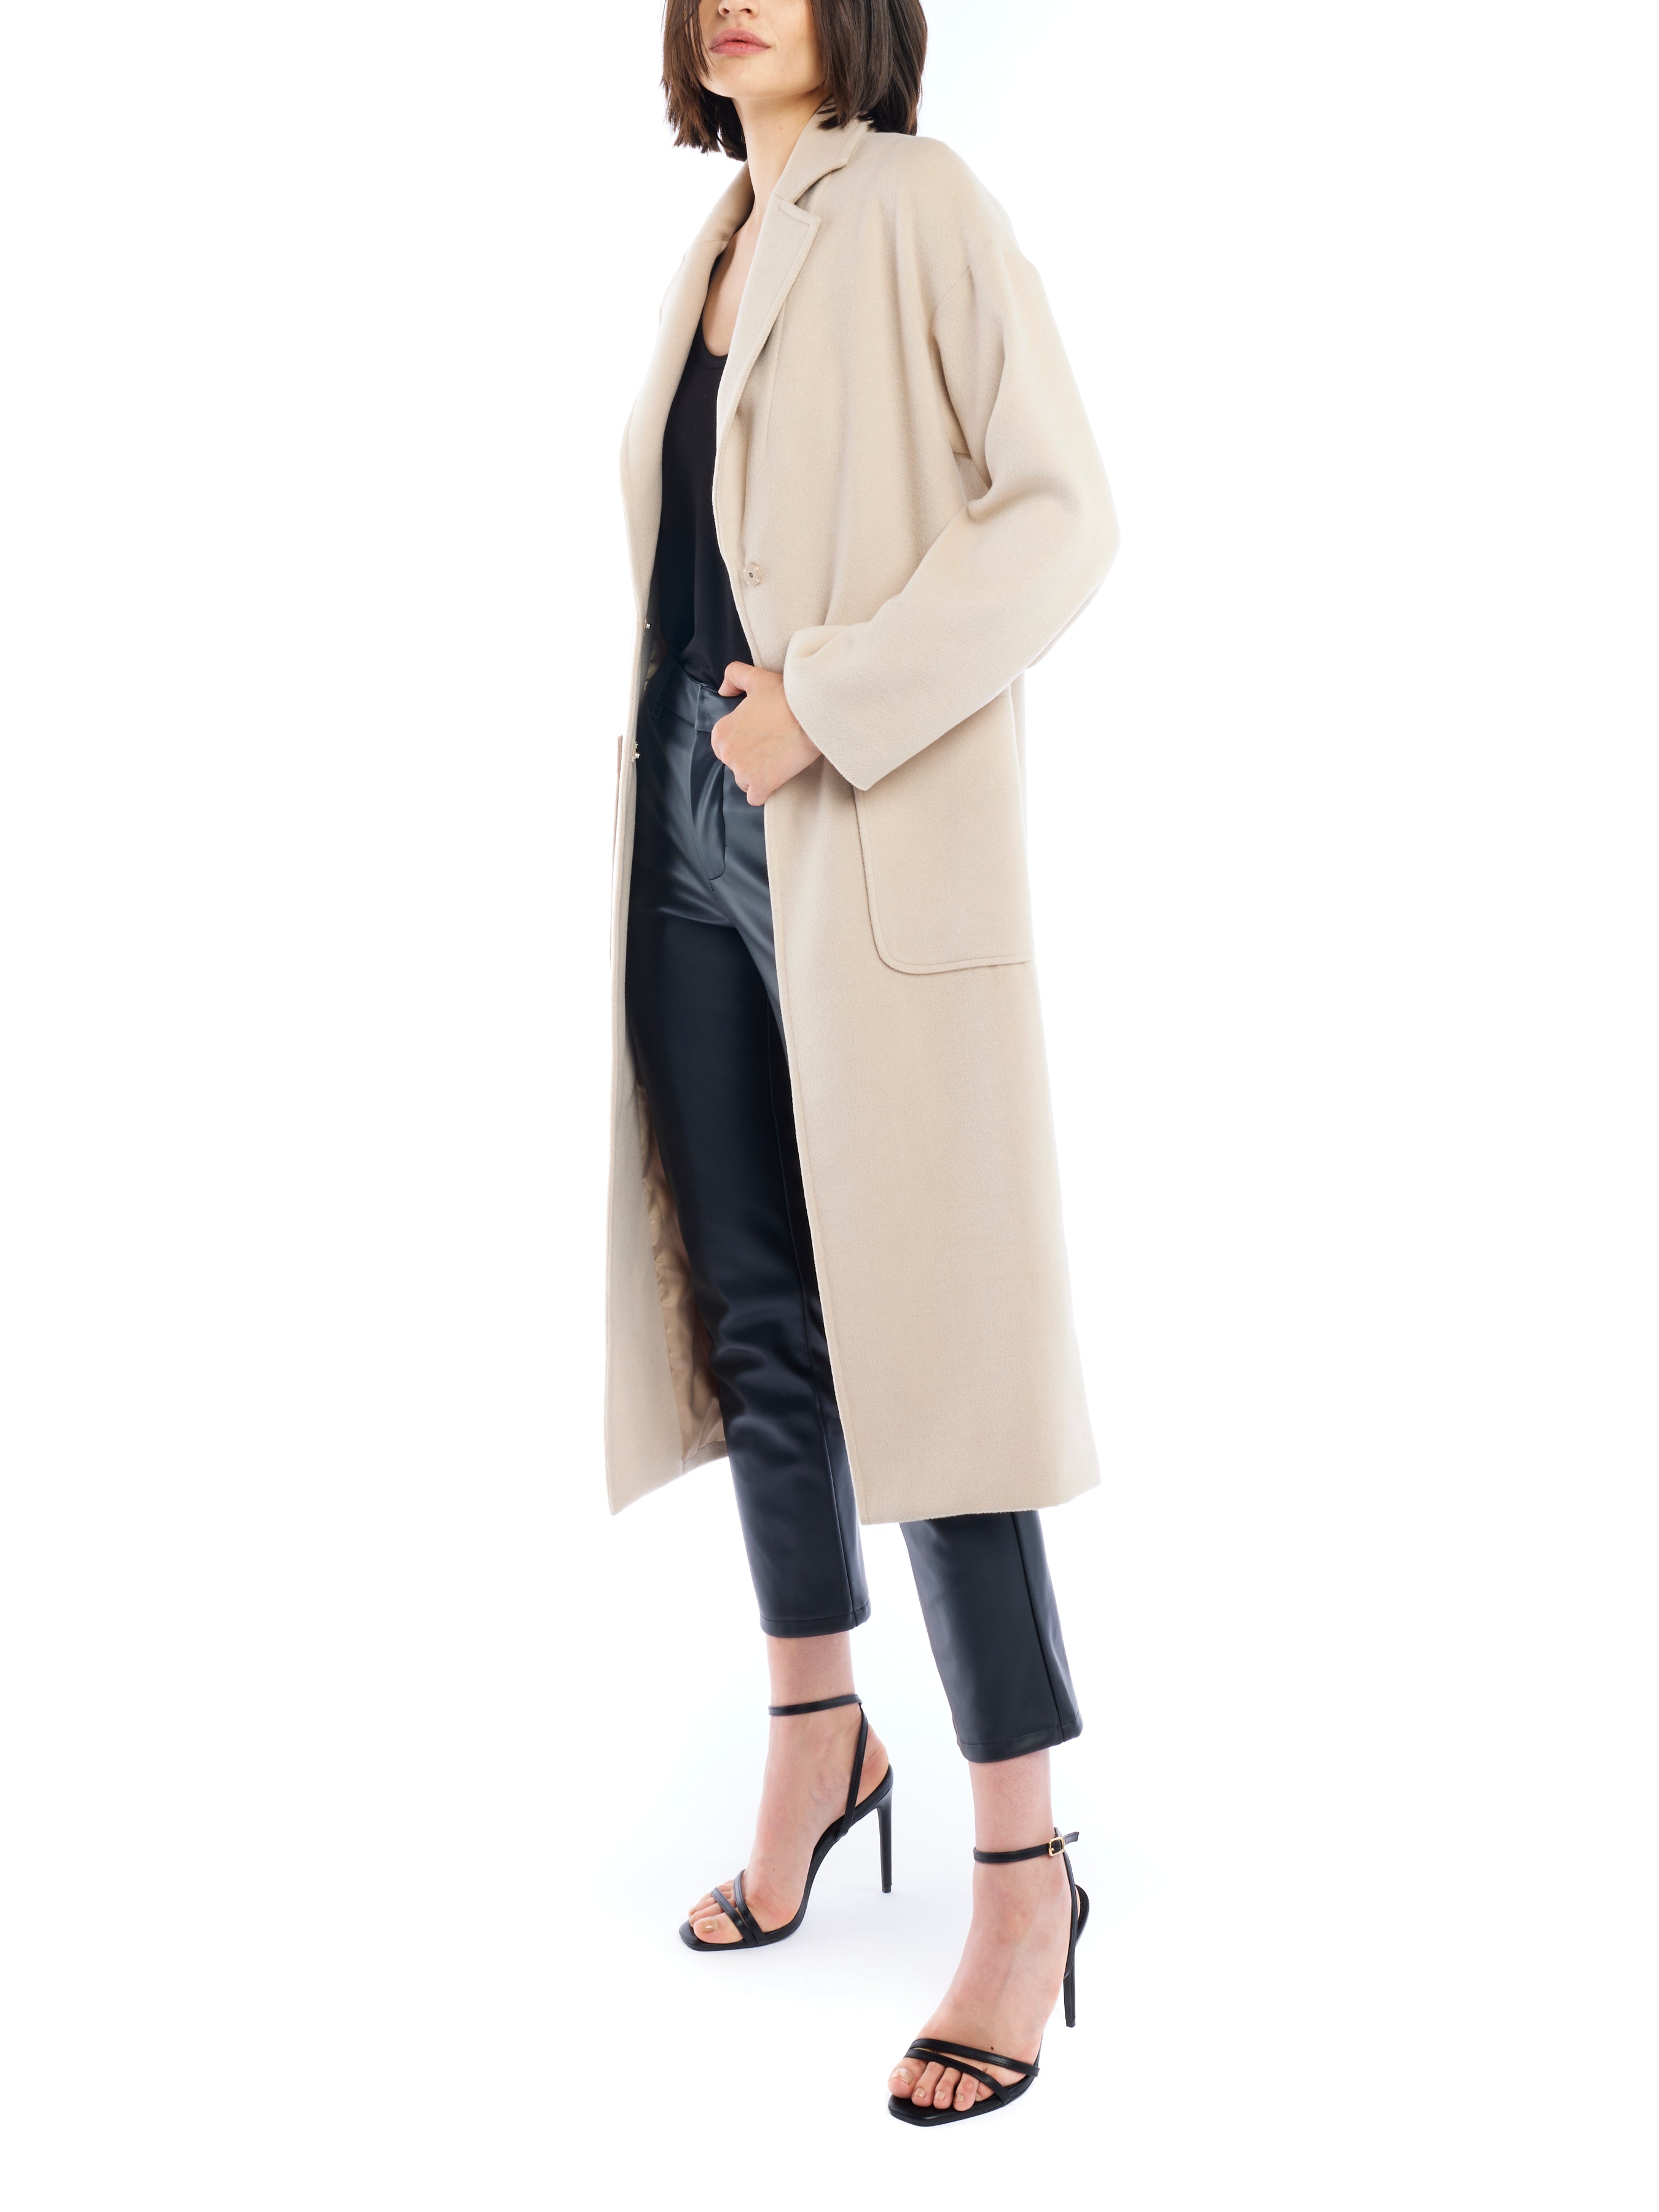 Clifton midi length jacket featuring hidden snap closure and large front pockets in taupe - side